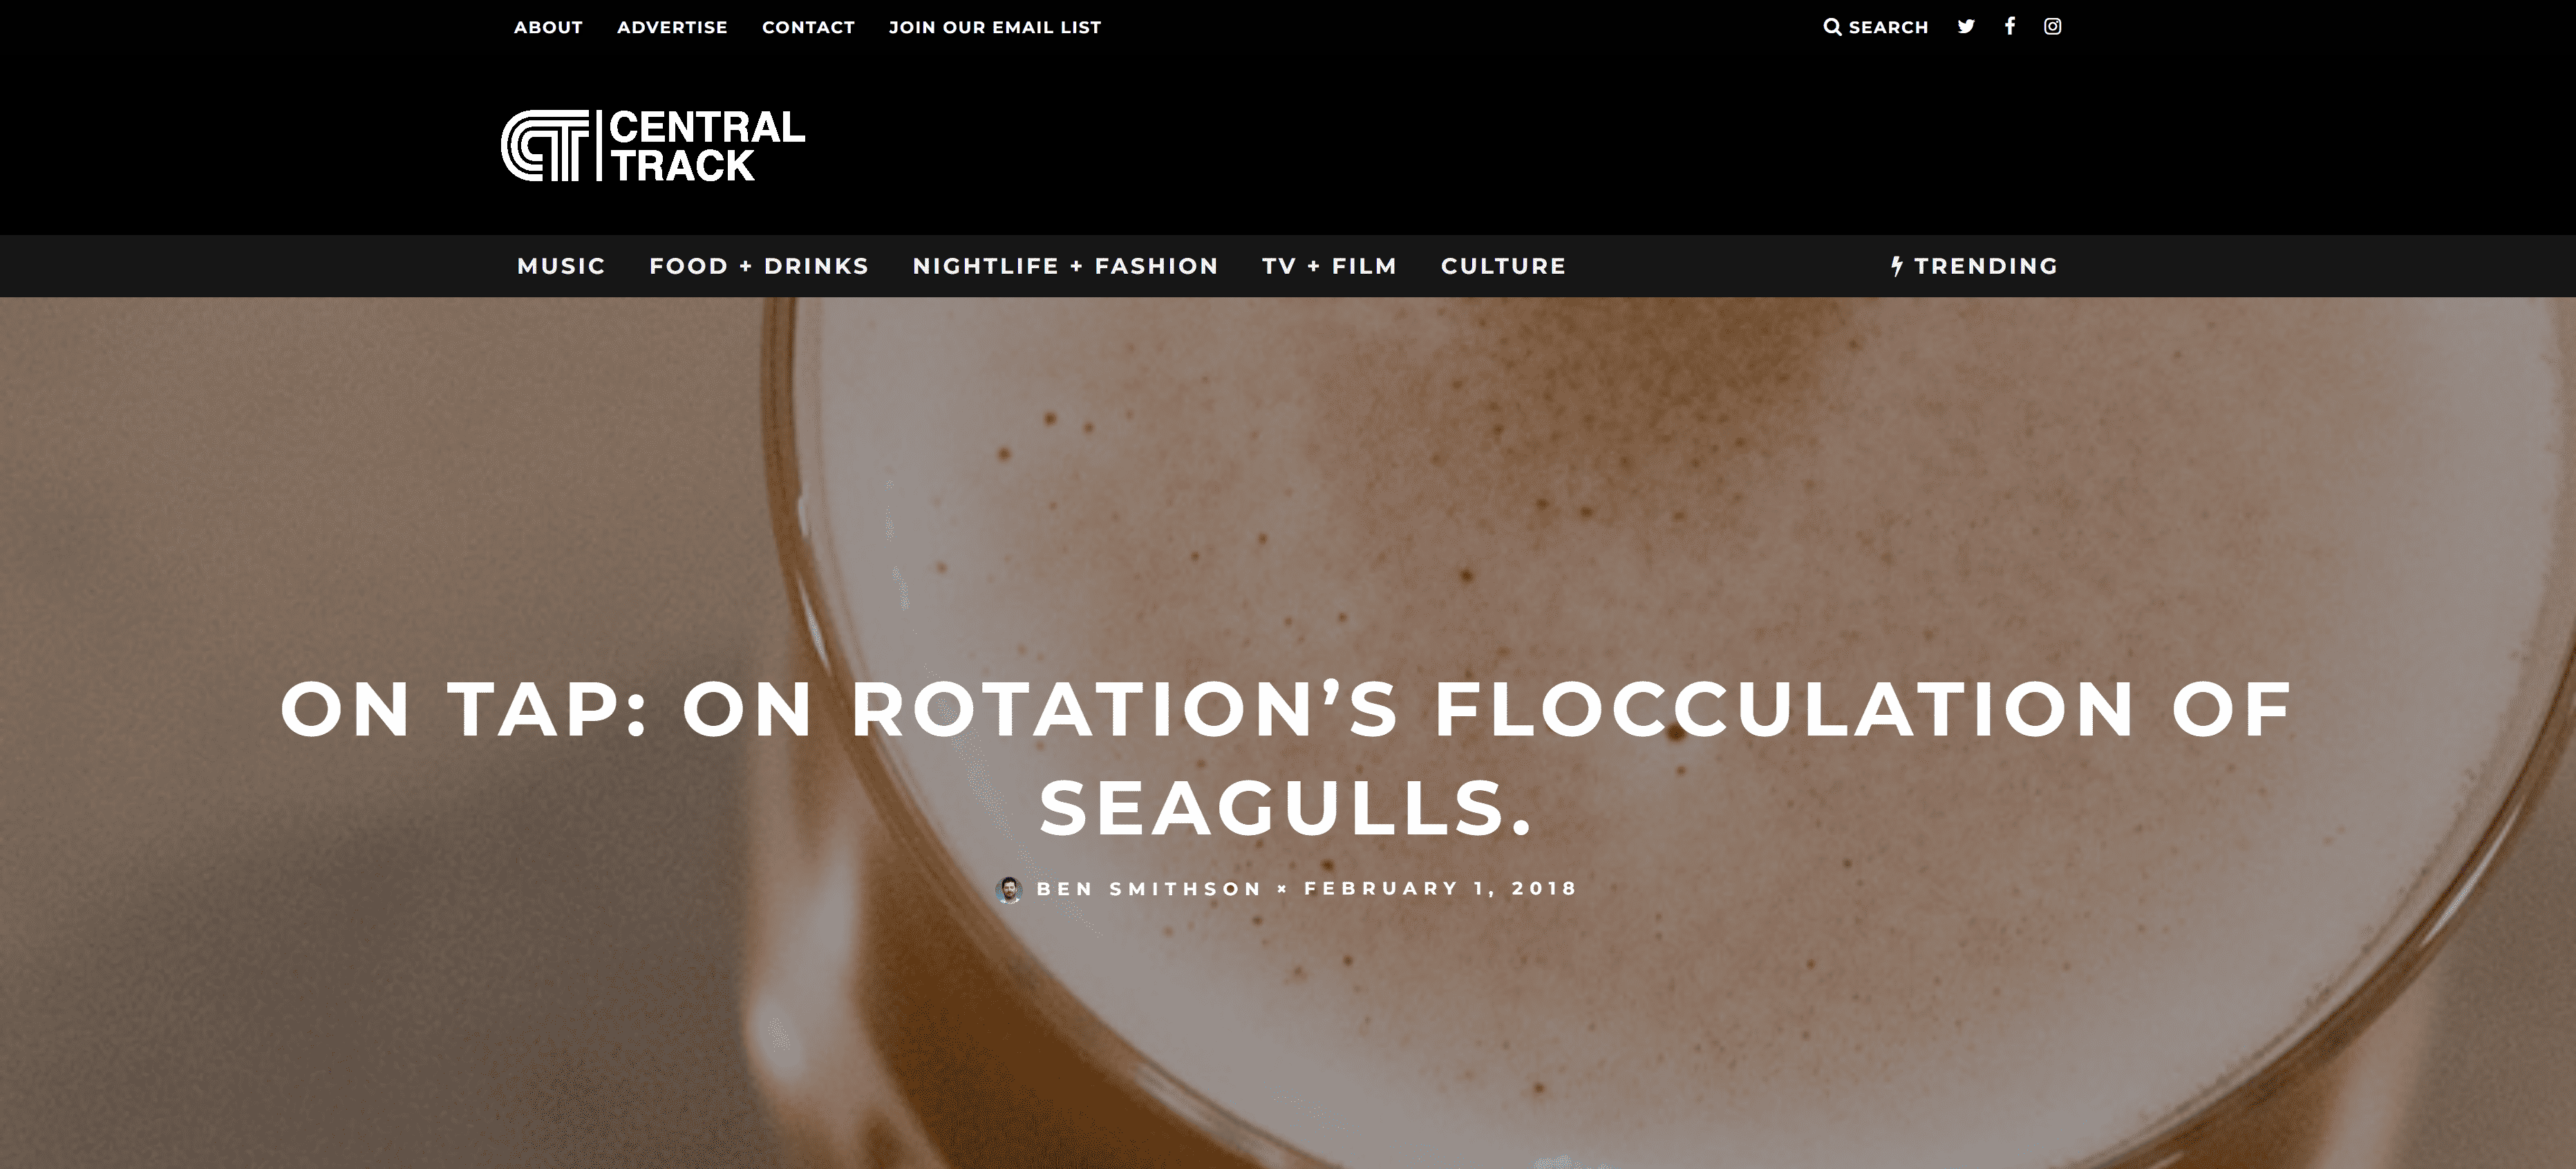 Central Track reviews Flocculation of Seagulls